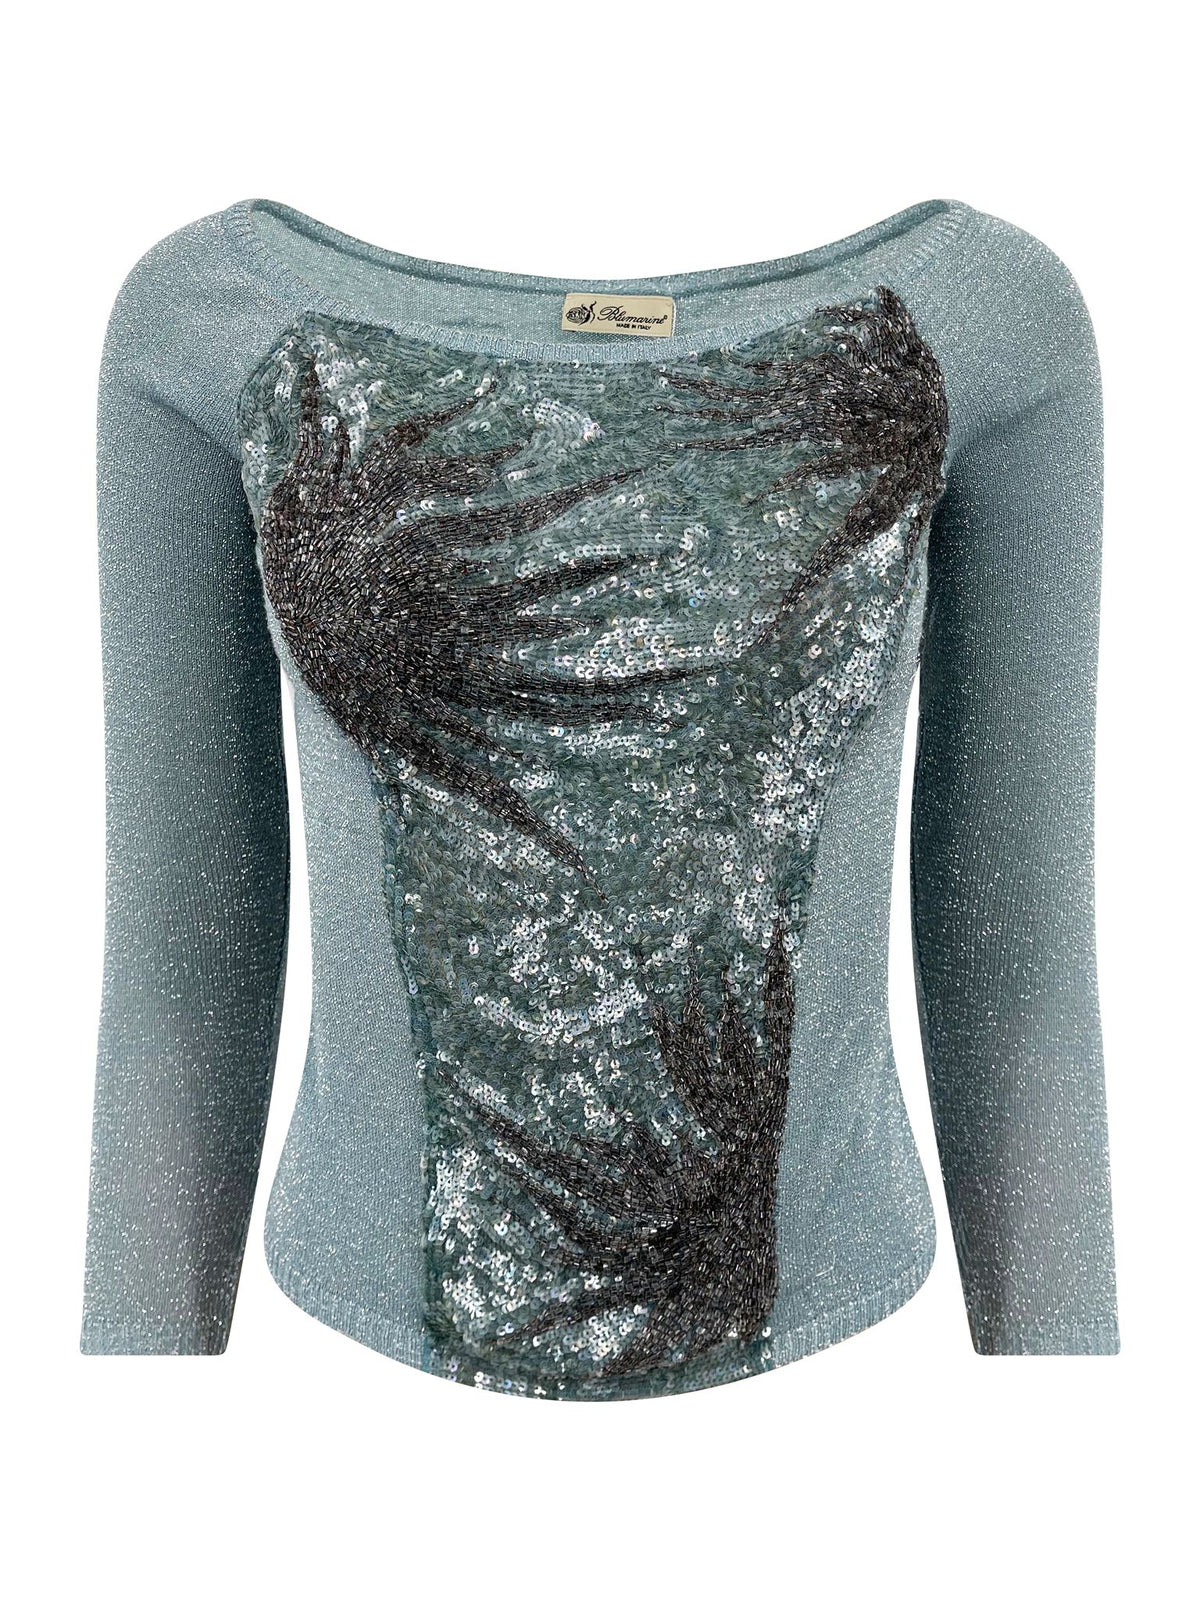 2003 F/W Blumarine Sequin Embellished Sweater - ONFEMME By Lindsey's Kloset